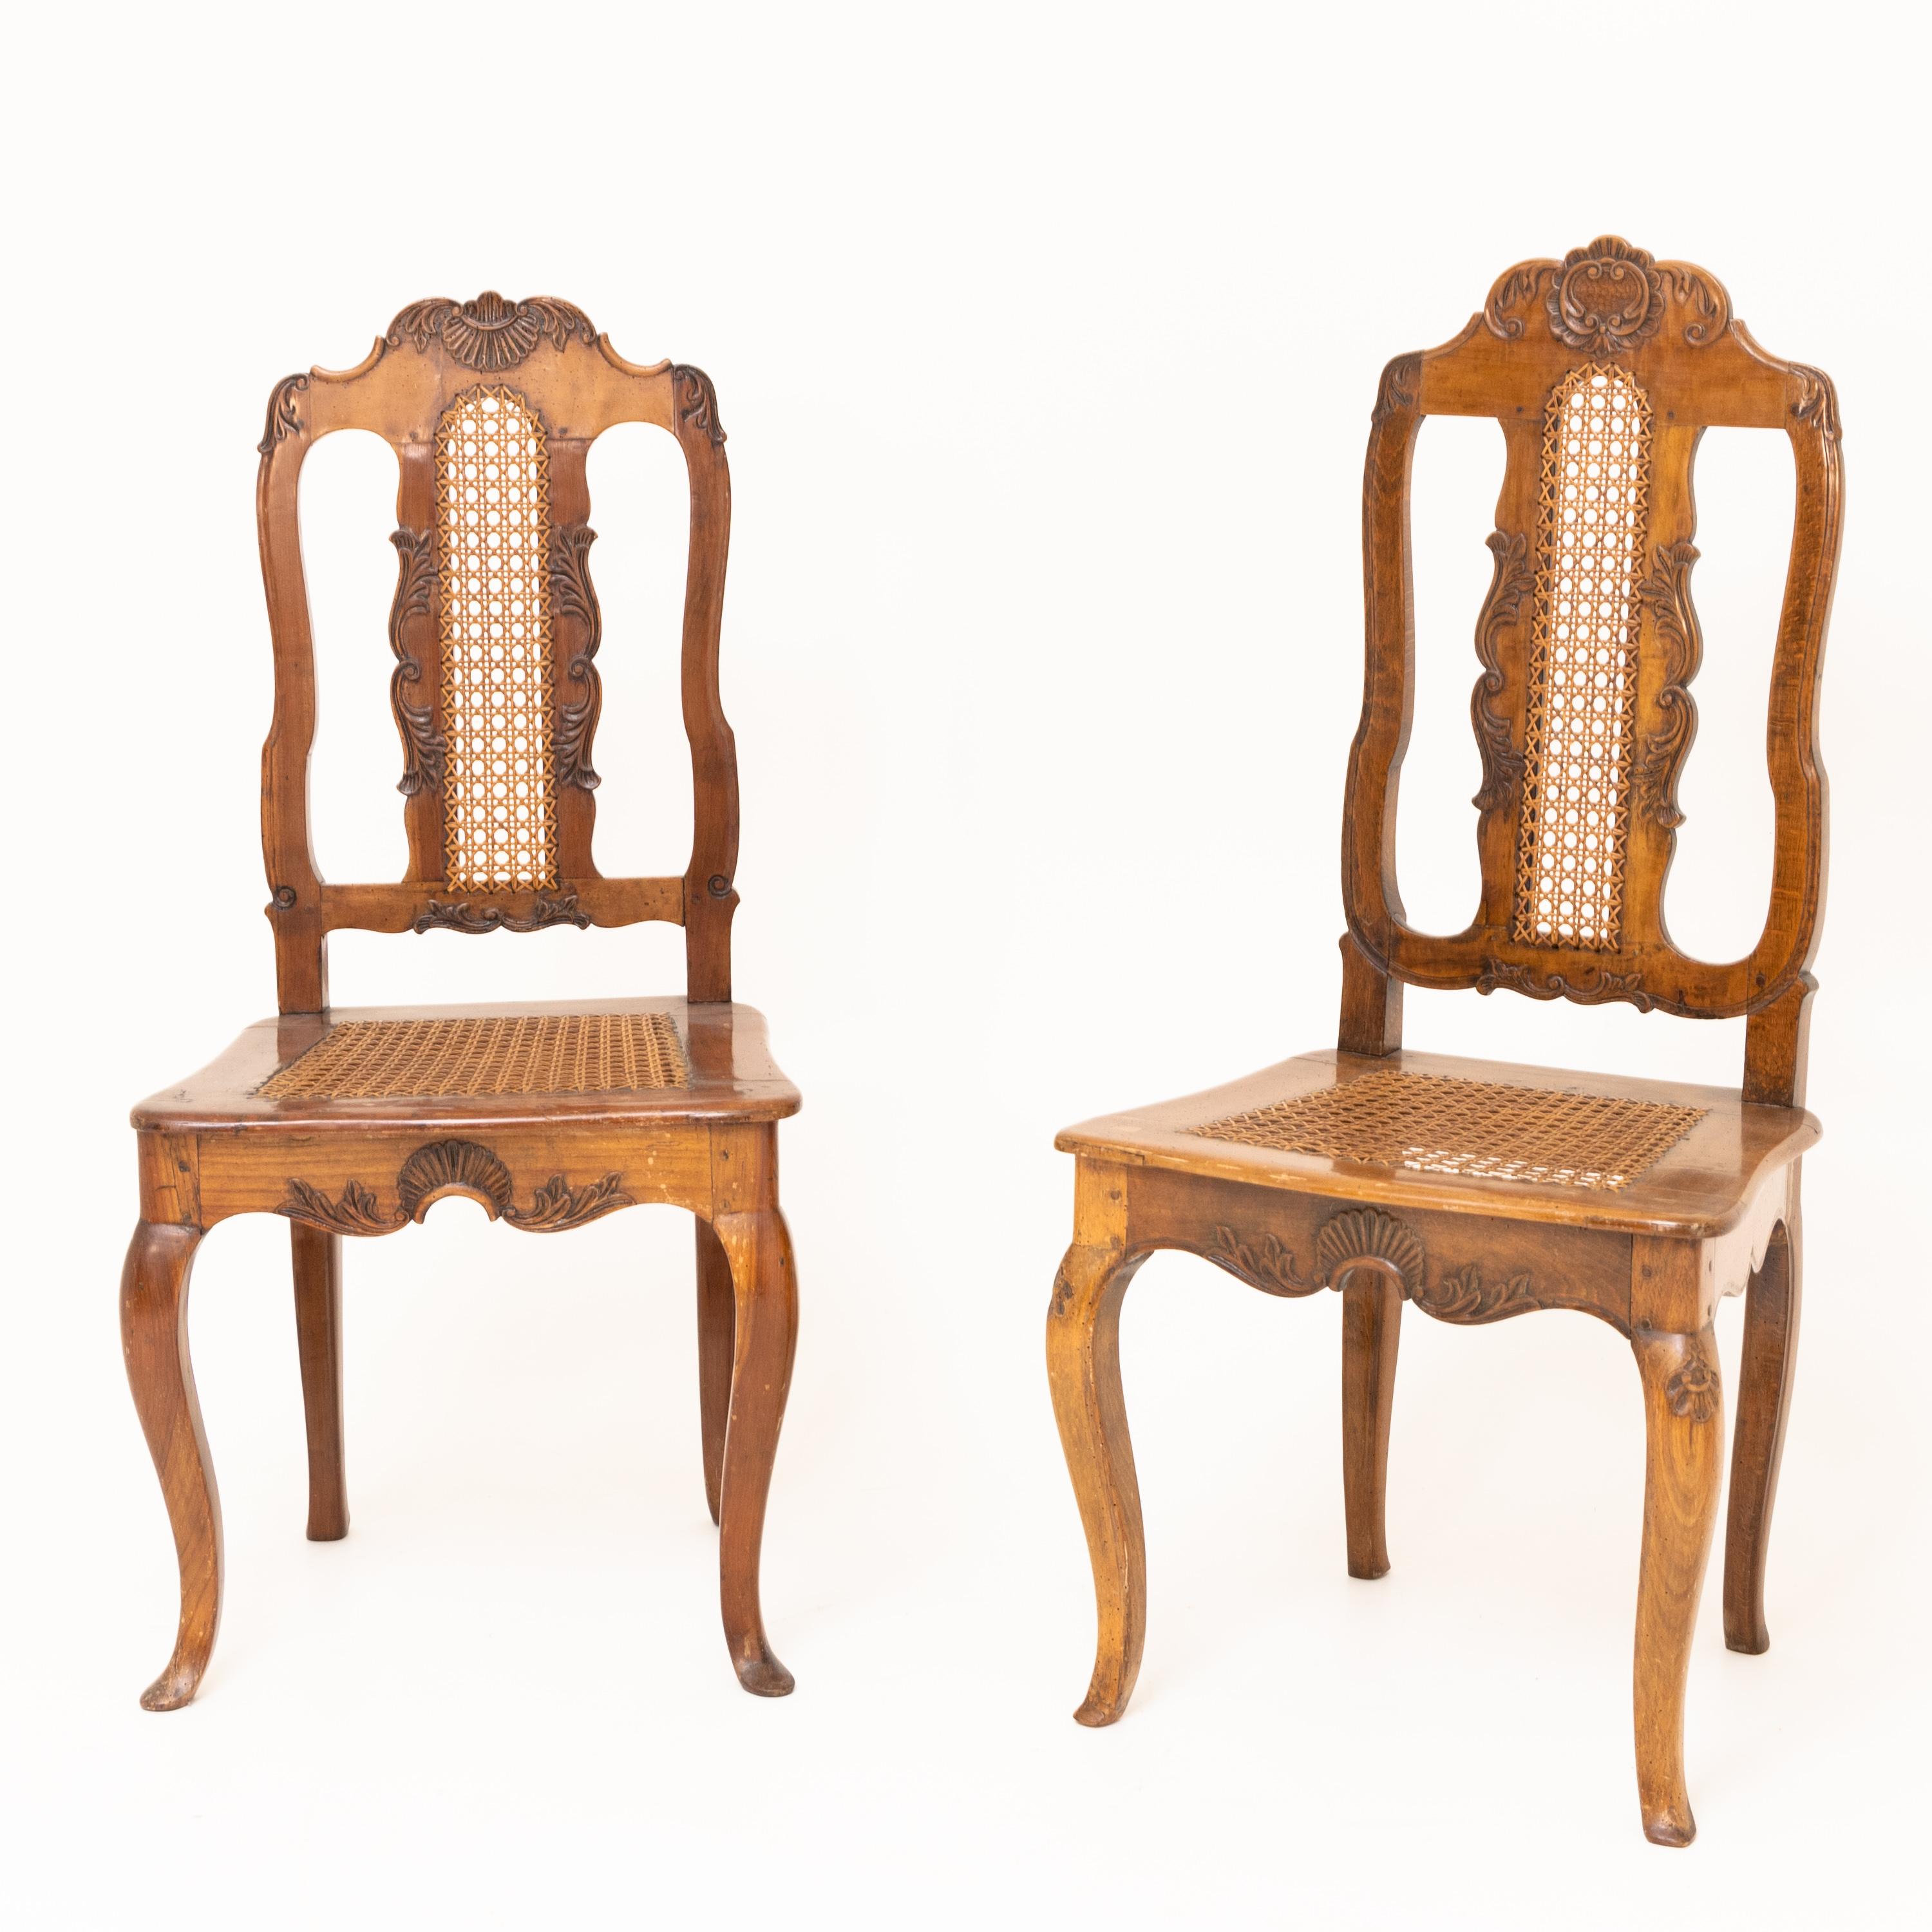 Two chairs with slightly different decors, carved of walnut or walnut and beech. Cf. stylistically: Bauer/Märker/Ohm: European Furniture from Gothic to Art Nouveau, Museum für Kunsthandwerk, Frankfurt a. M. 1976, pp. 103: 131.

Chair 1 101.5 x